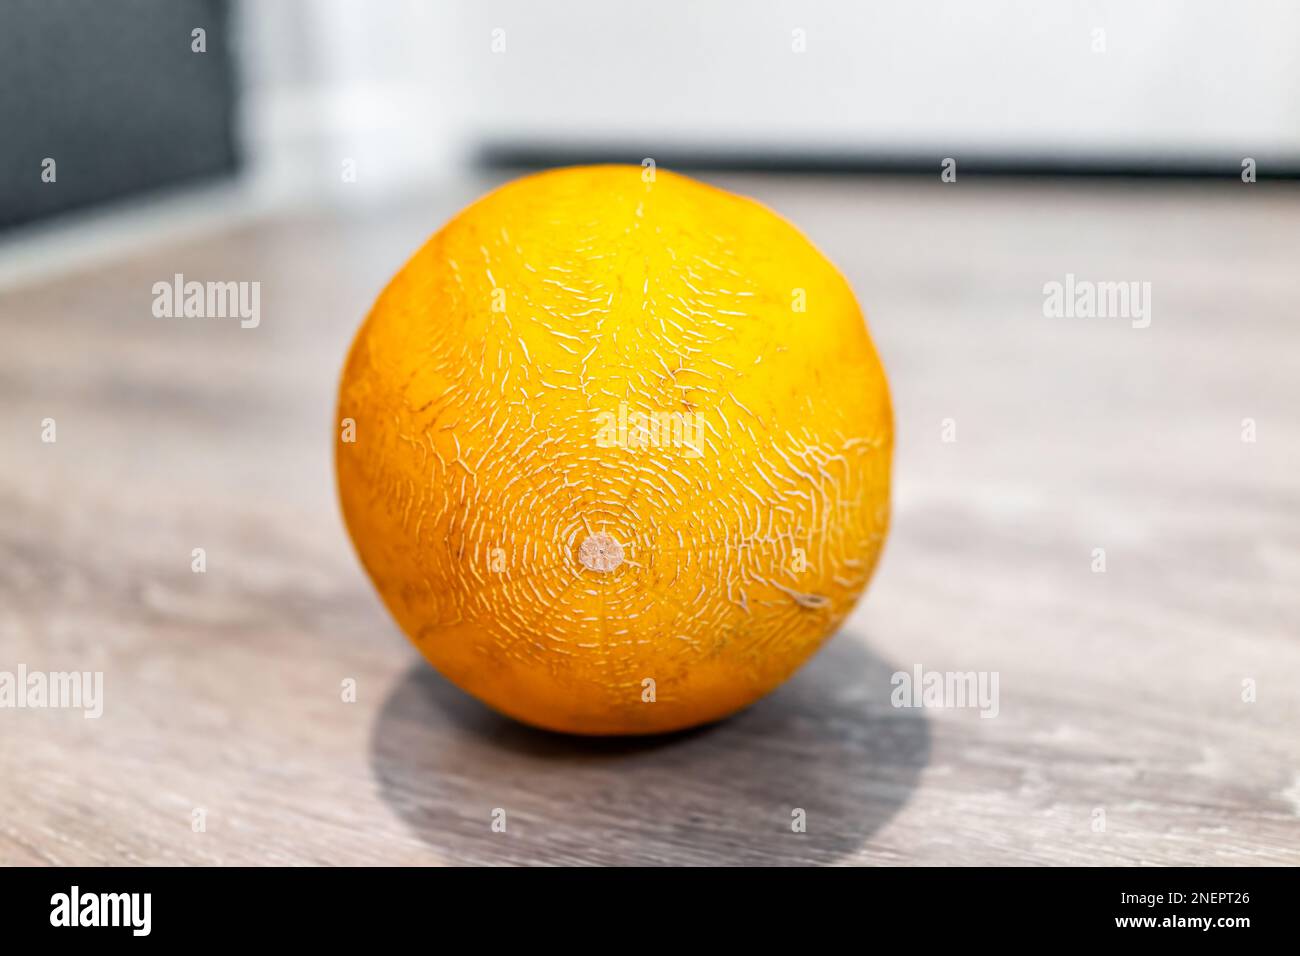 Winter hami melon whole yellow sweet fruit with texture of rind and pattern Stock Photo